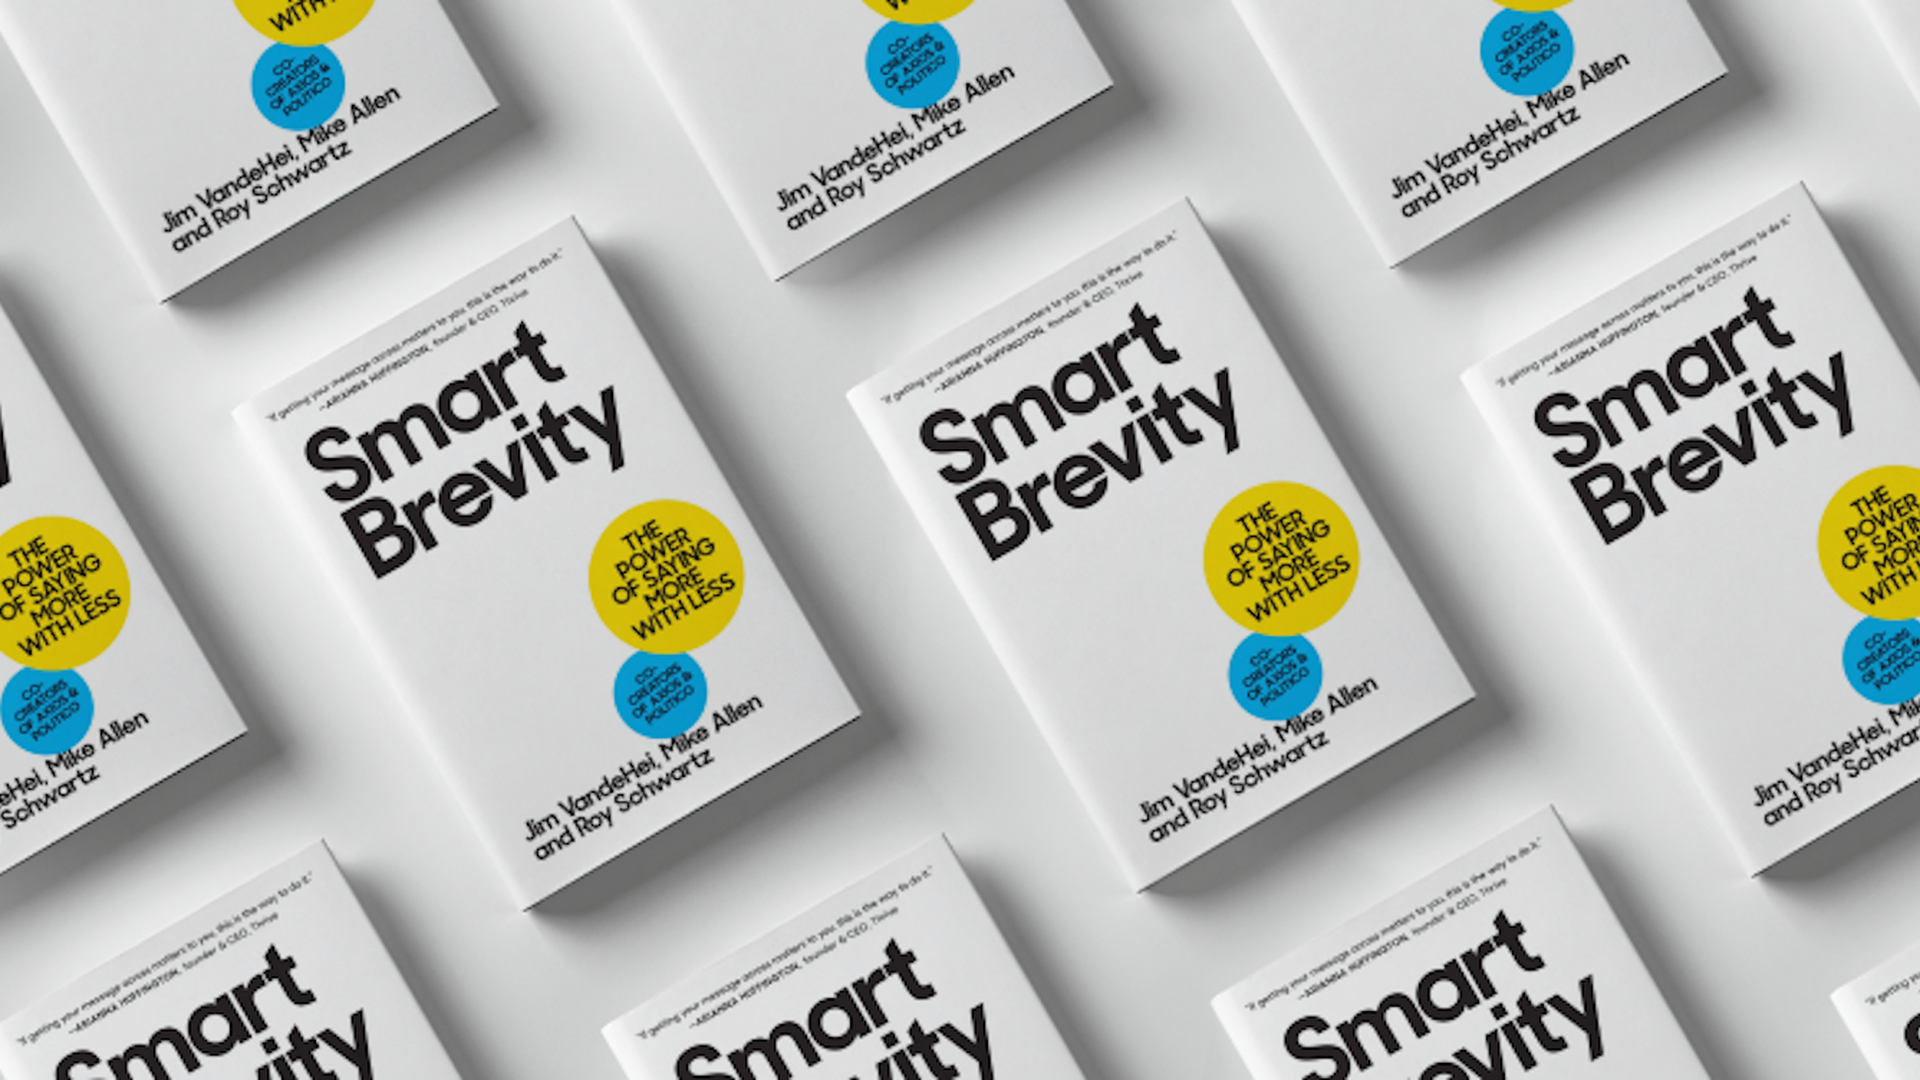 Several copies of the Smart Brevity book 